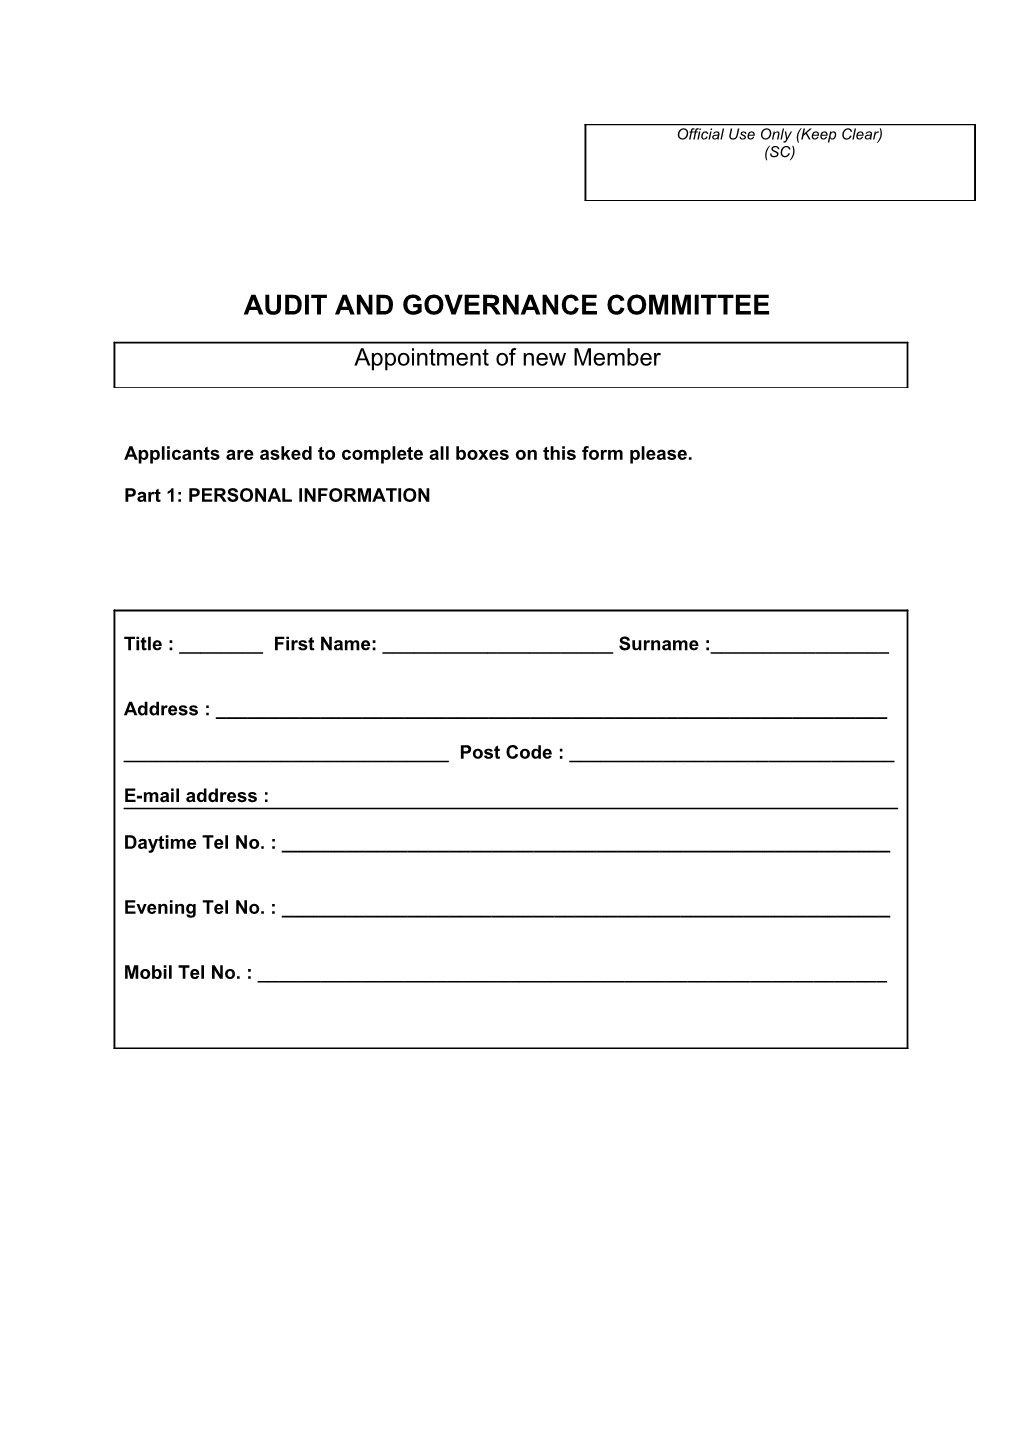 Audit and Governance Committee